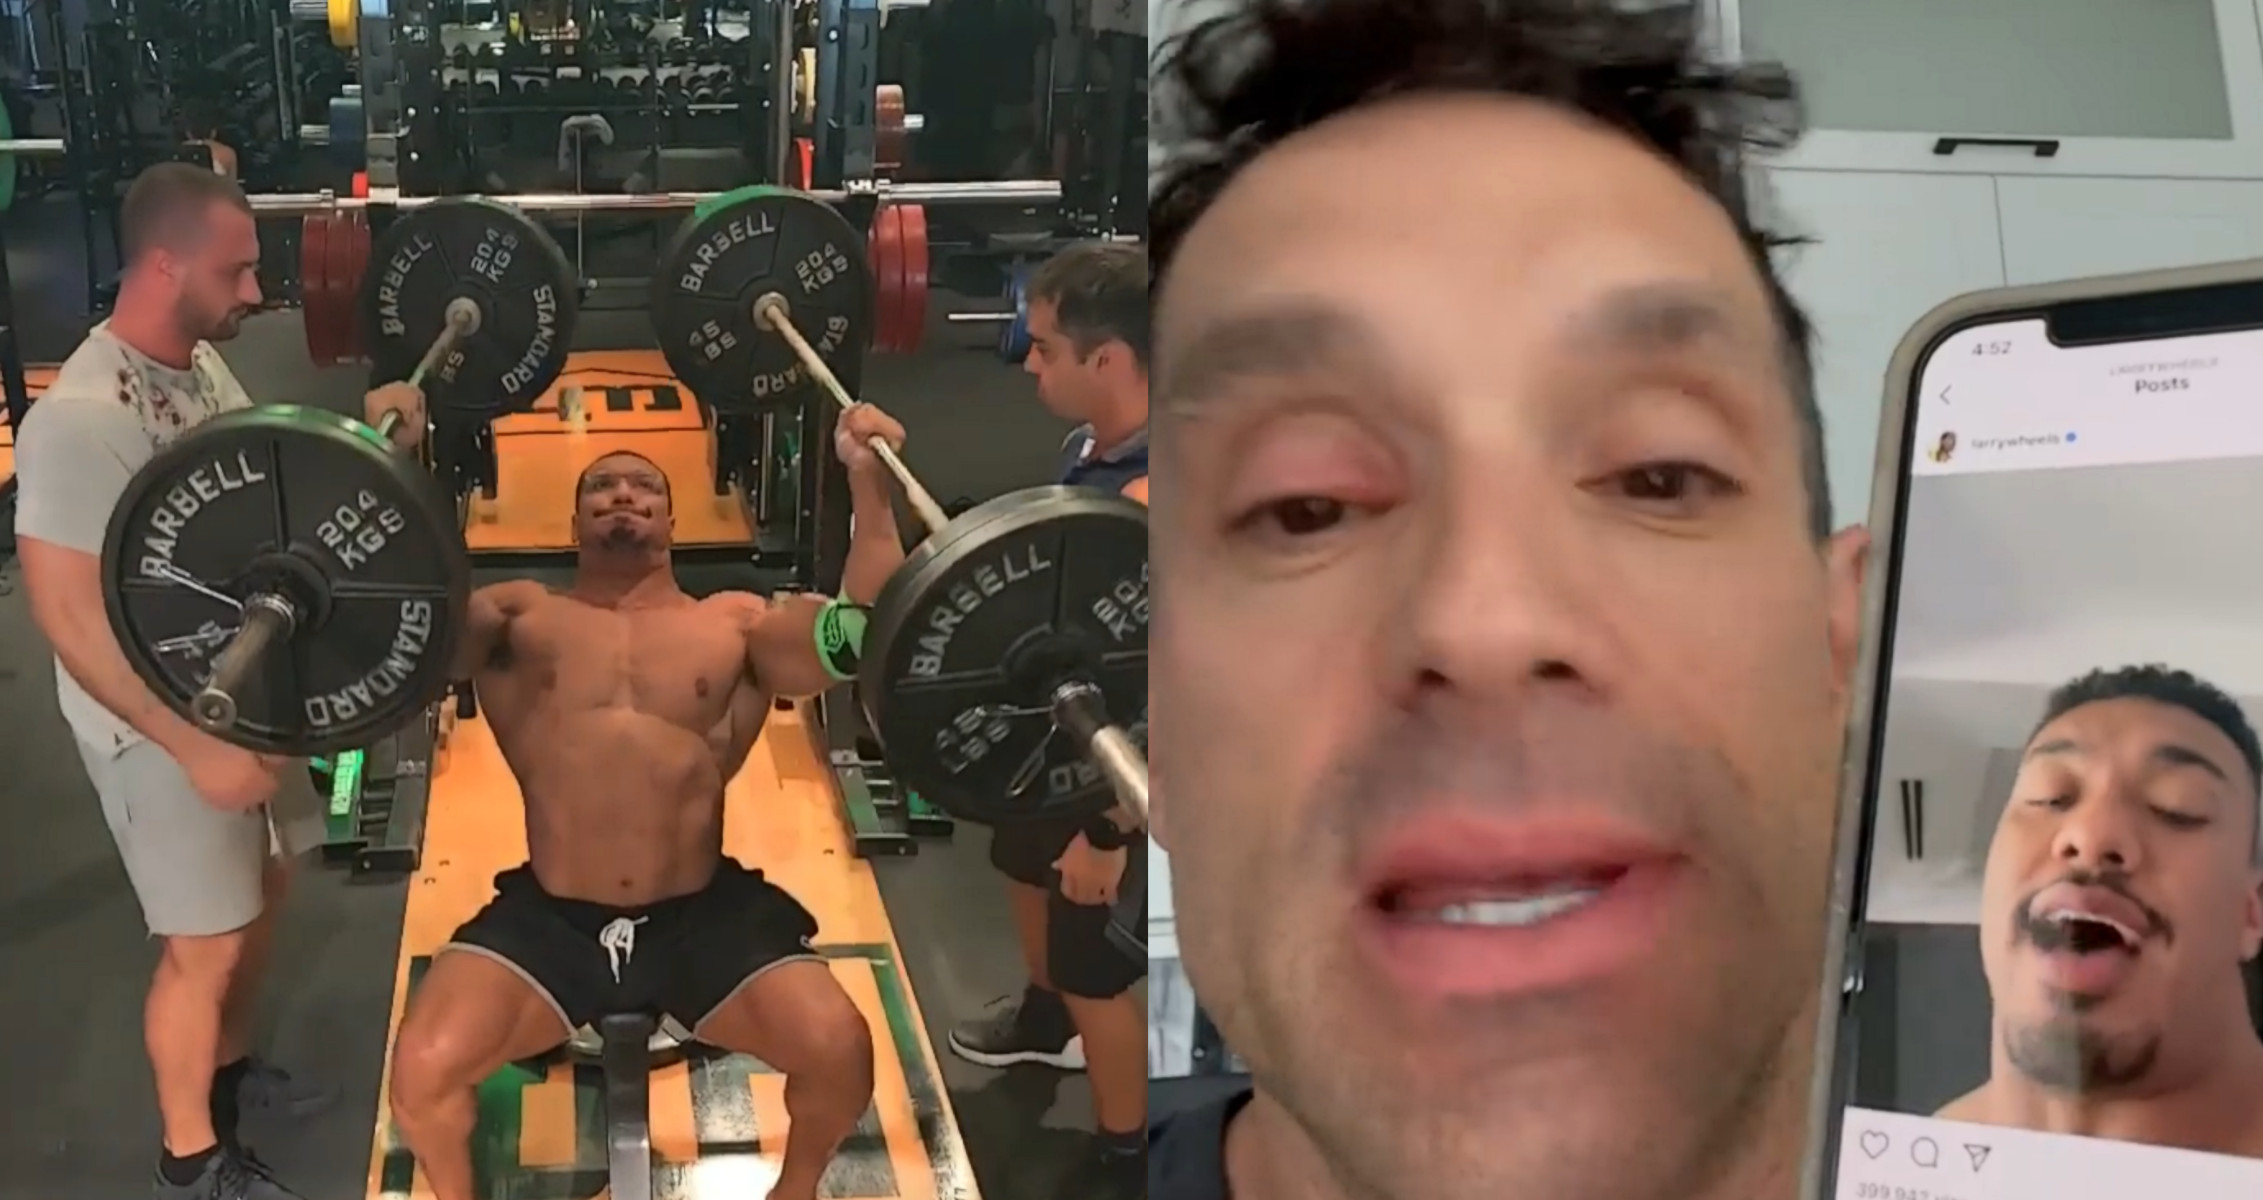 Greg Doucette Calls Out Larry Wheels For Allegedly Using “Fake” Weights